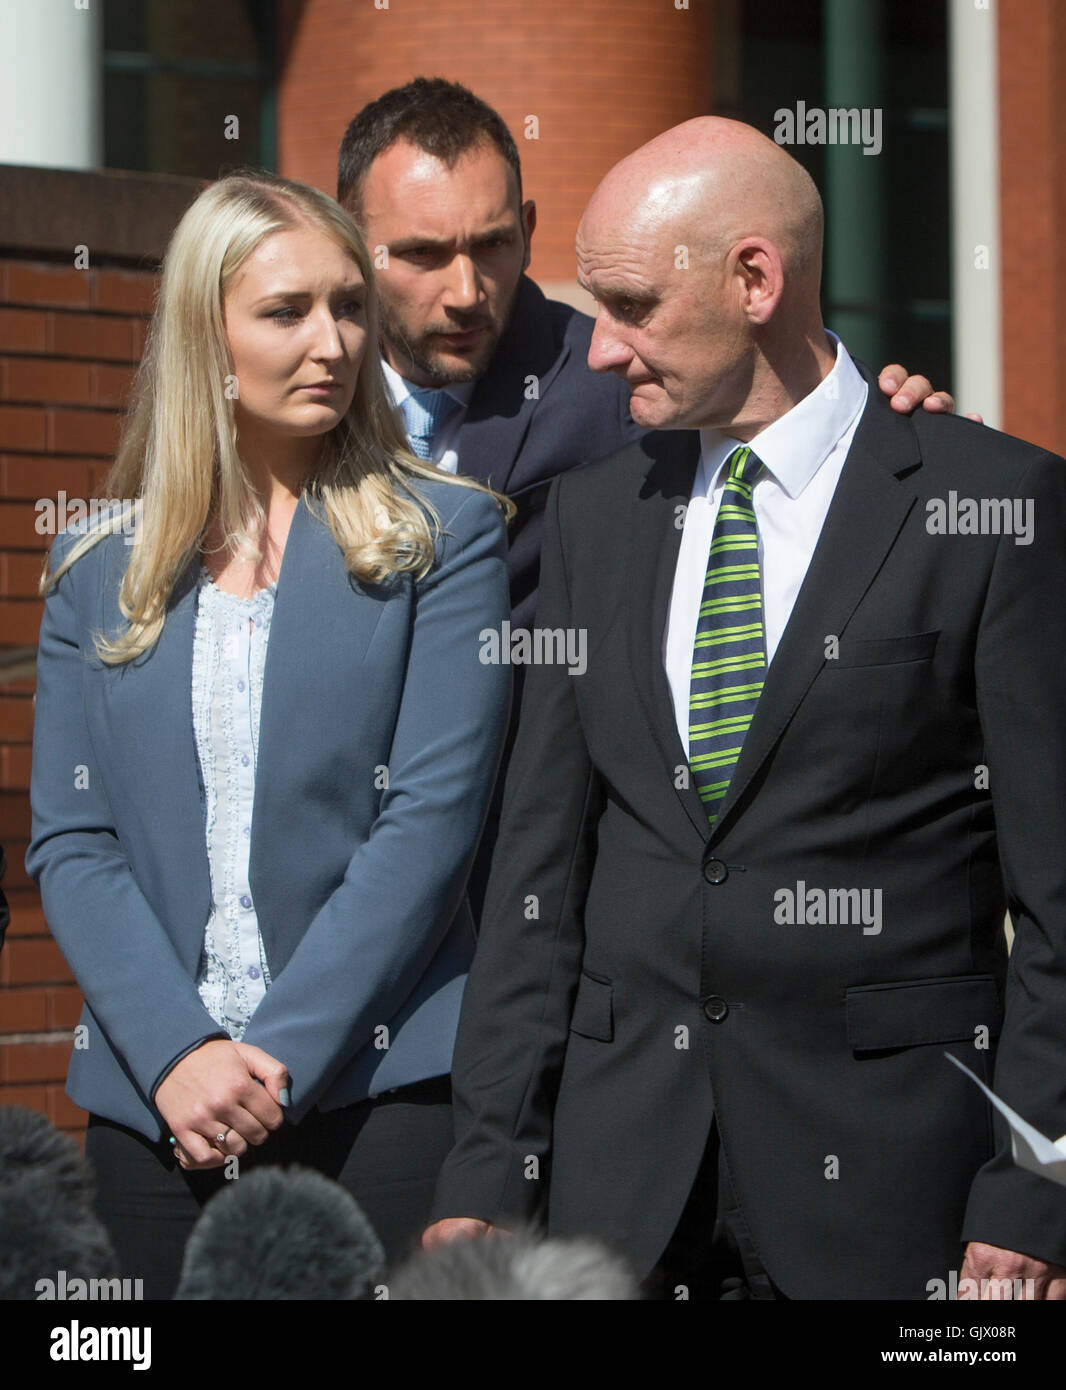 Ian Johnston (right) partner of murder victim Sadie Hartley, with his daughter Hannah, outside Preston Crown Court, after his 'bunny boiler' ex was jailed for life and ordered to serve a minimum of 30 years in jail for the gruesome stun gun murder of her love rival. Stock Photo